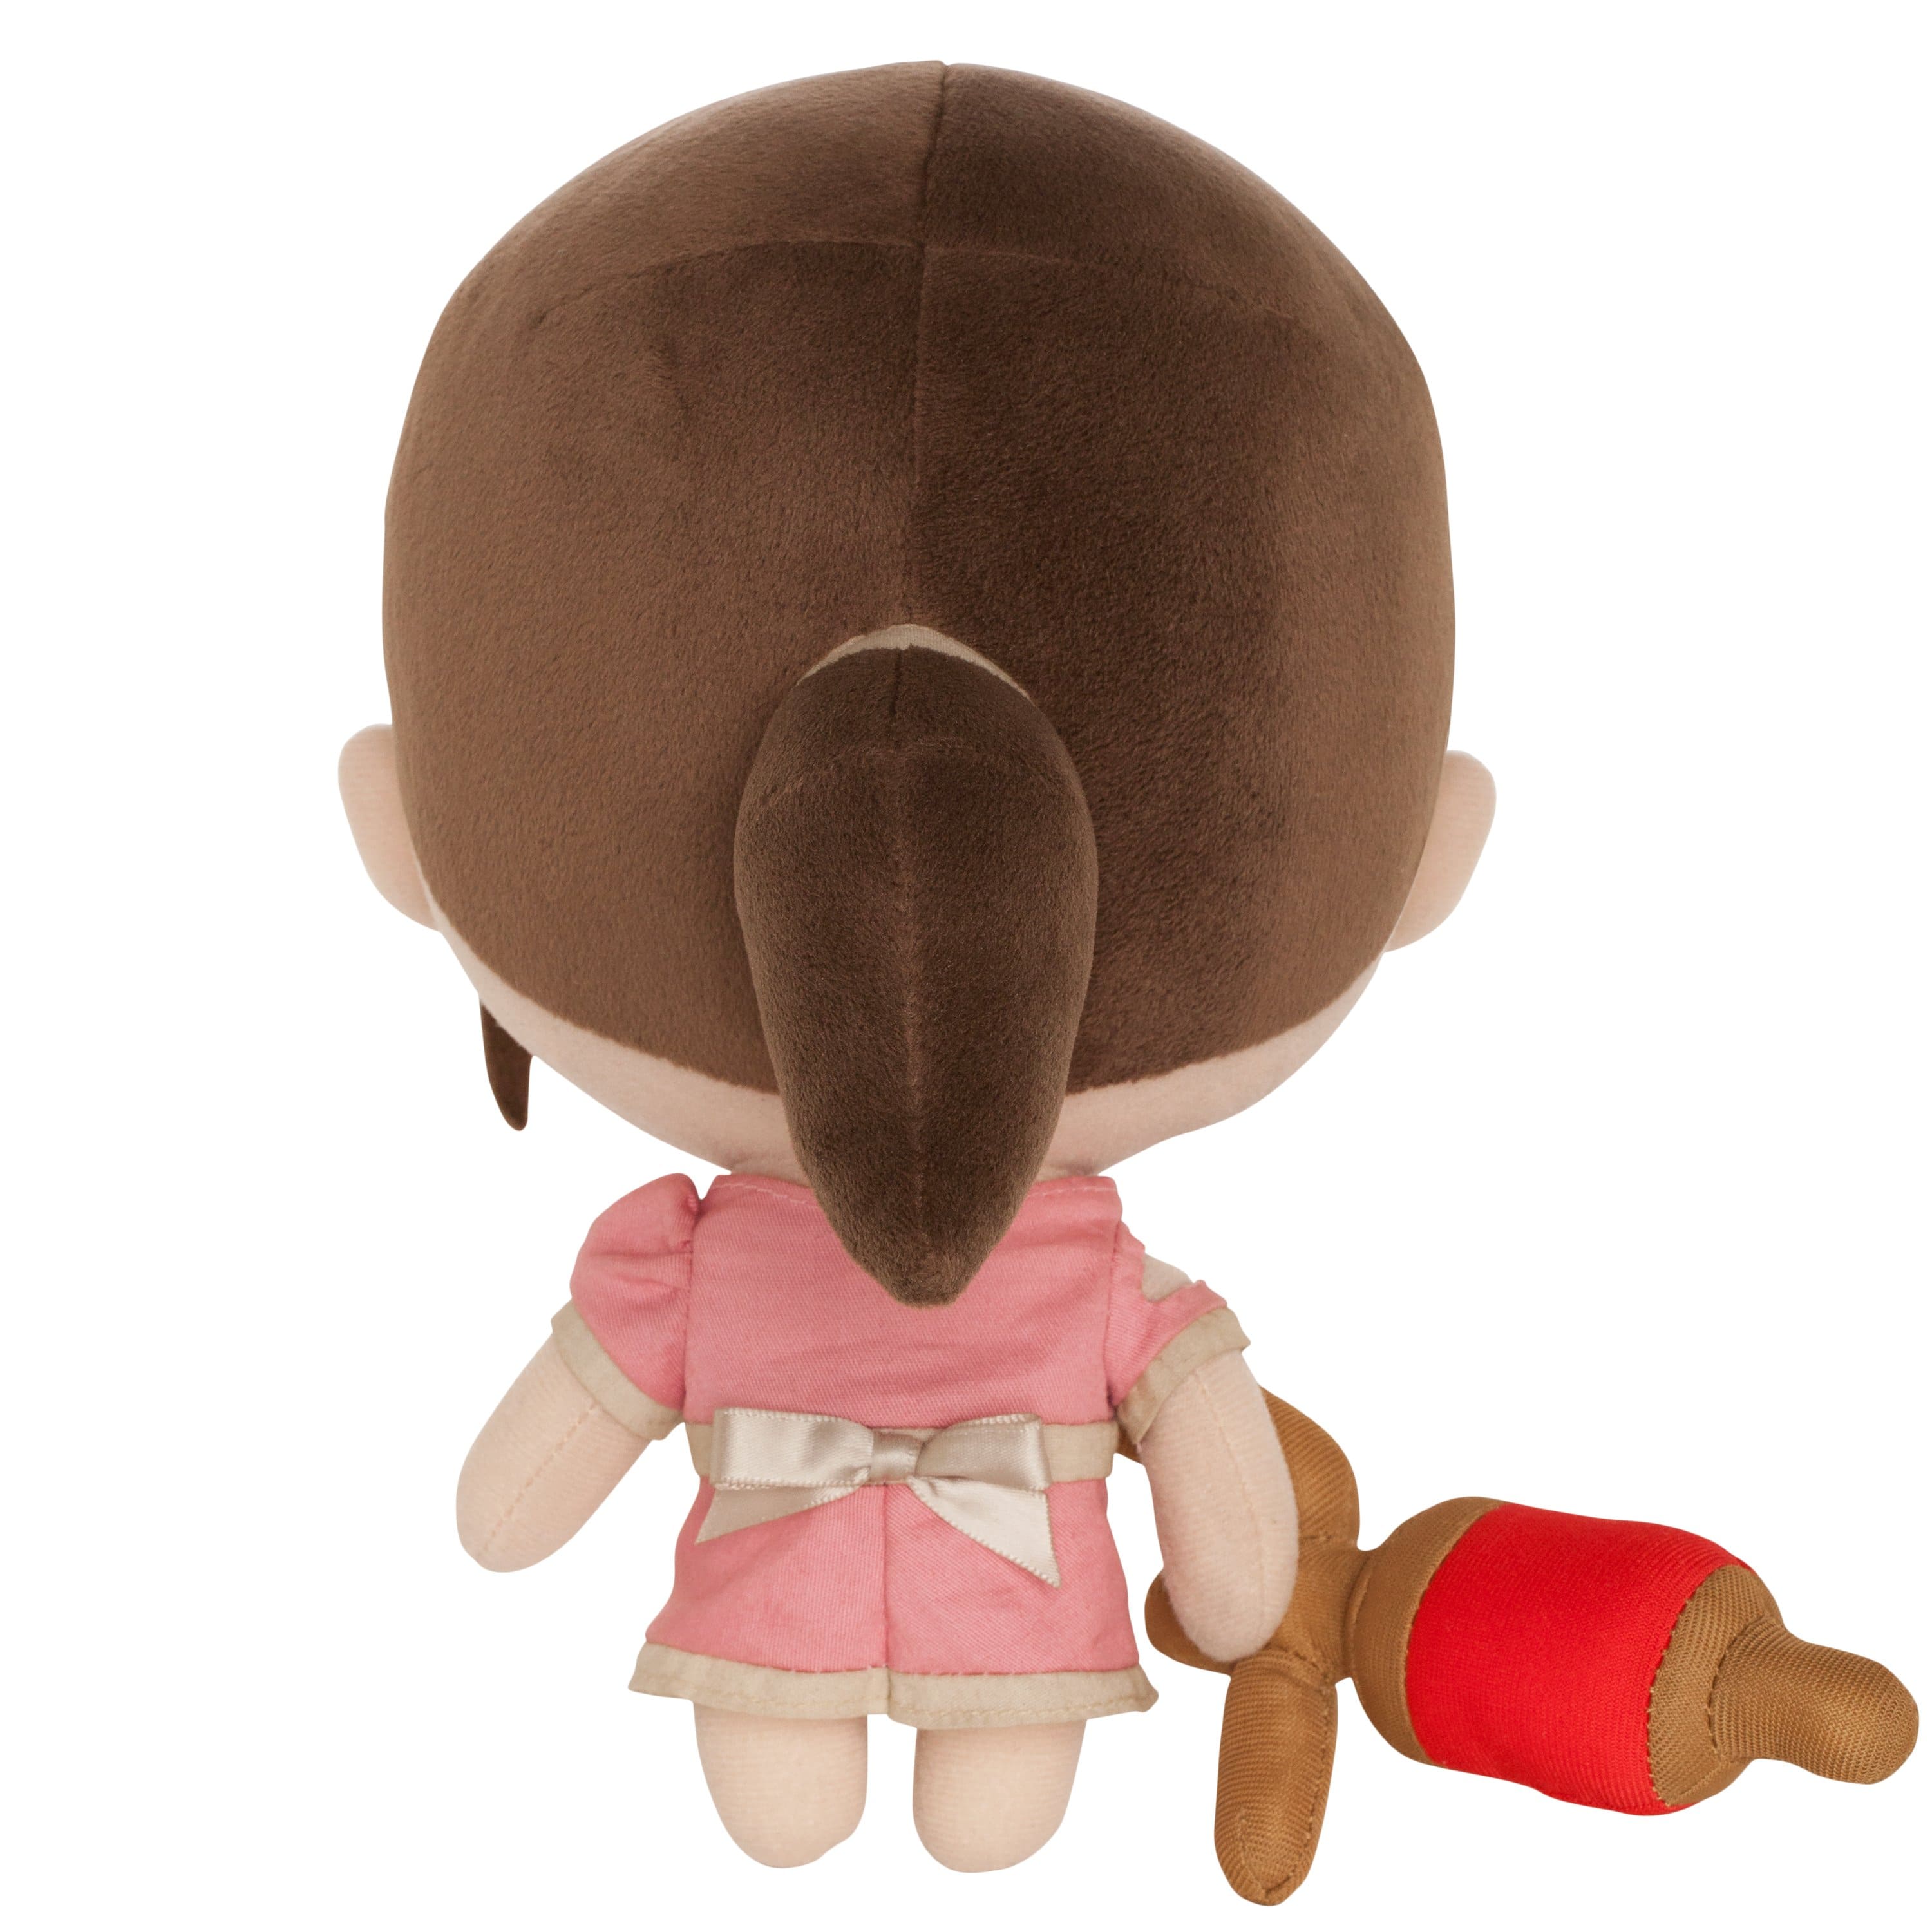 BioShock - 10" Little Sister Collector's Stuffed Plush Back View